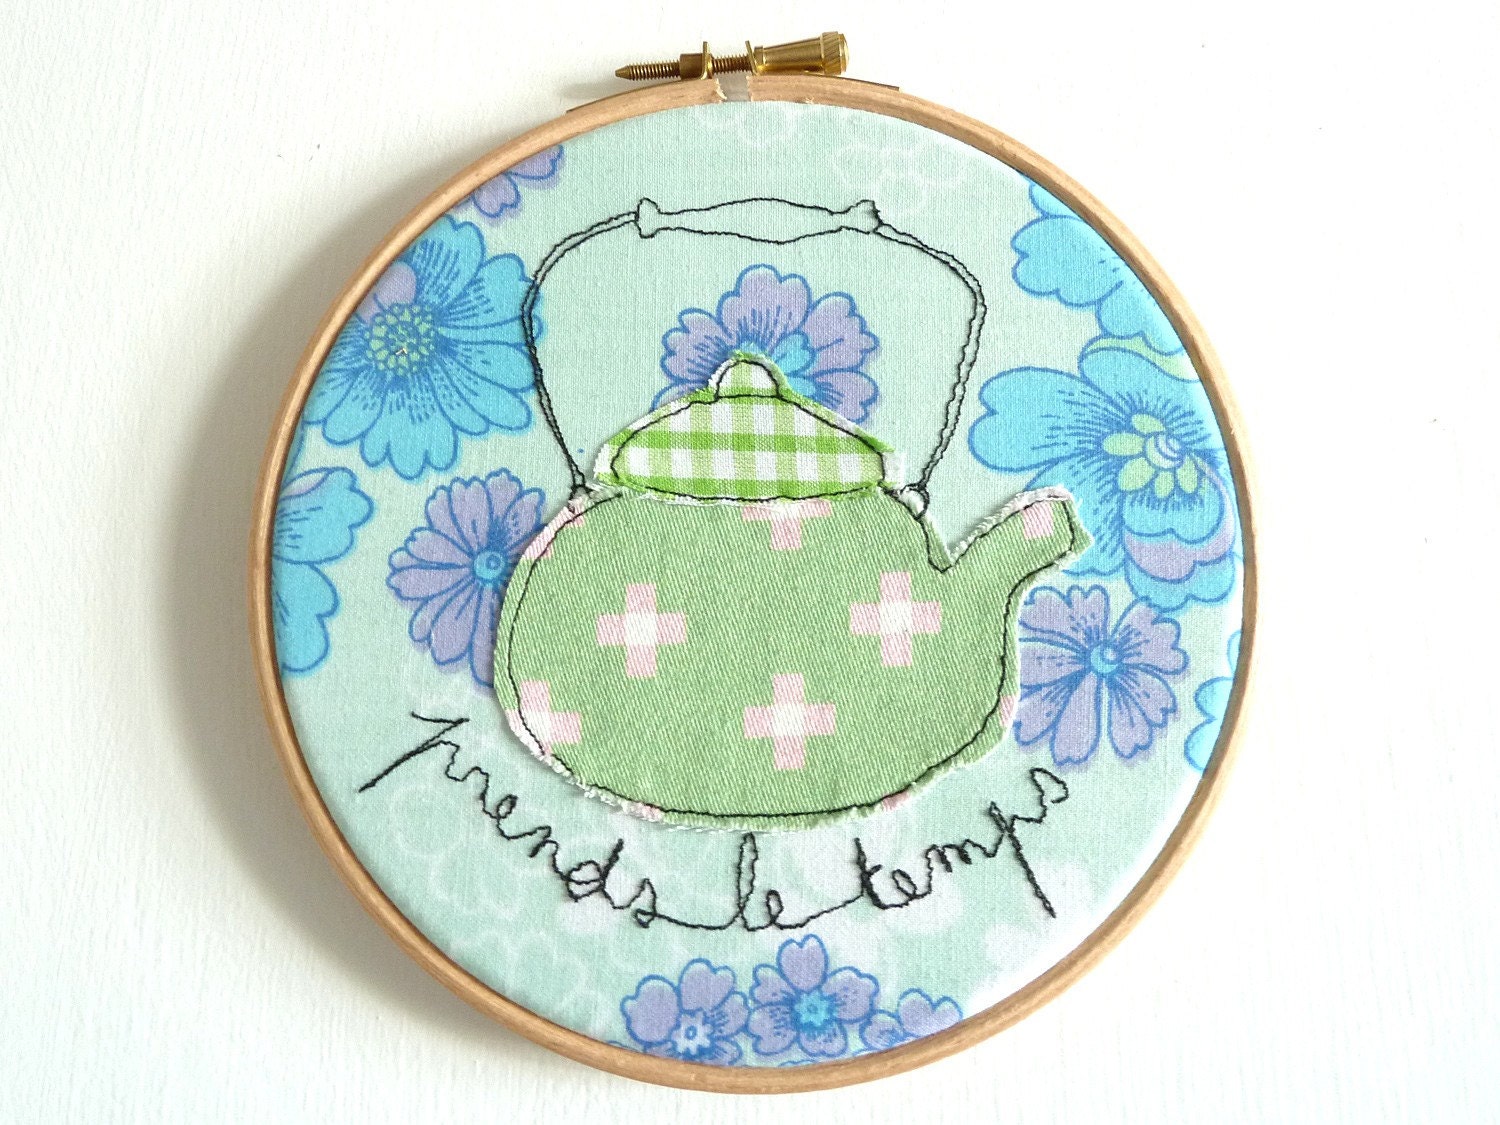 Embroidery Hoop Art - 'Prends le temps' Textile Illustration in blue & green - 6" hoop